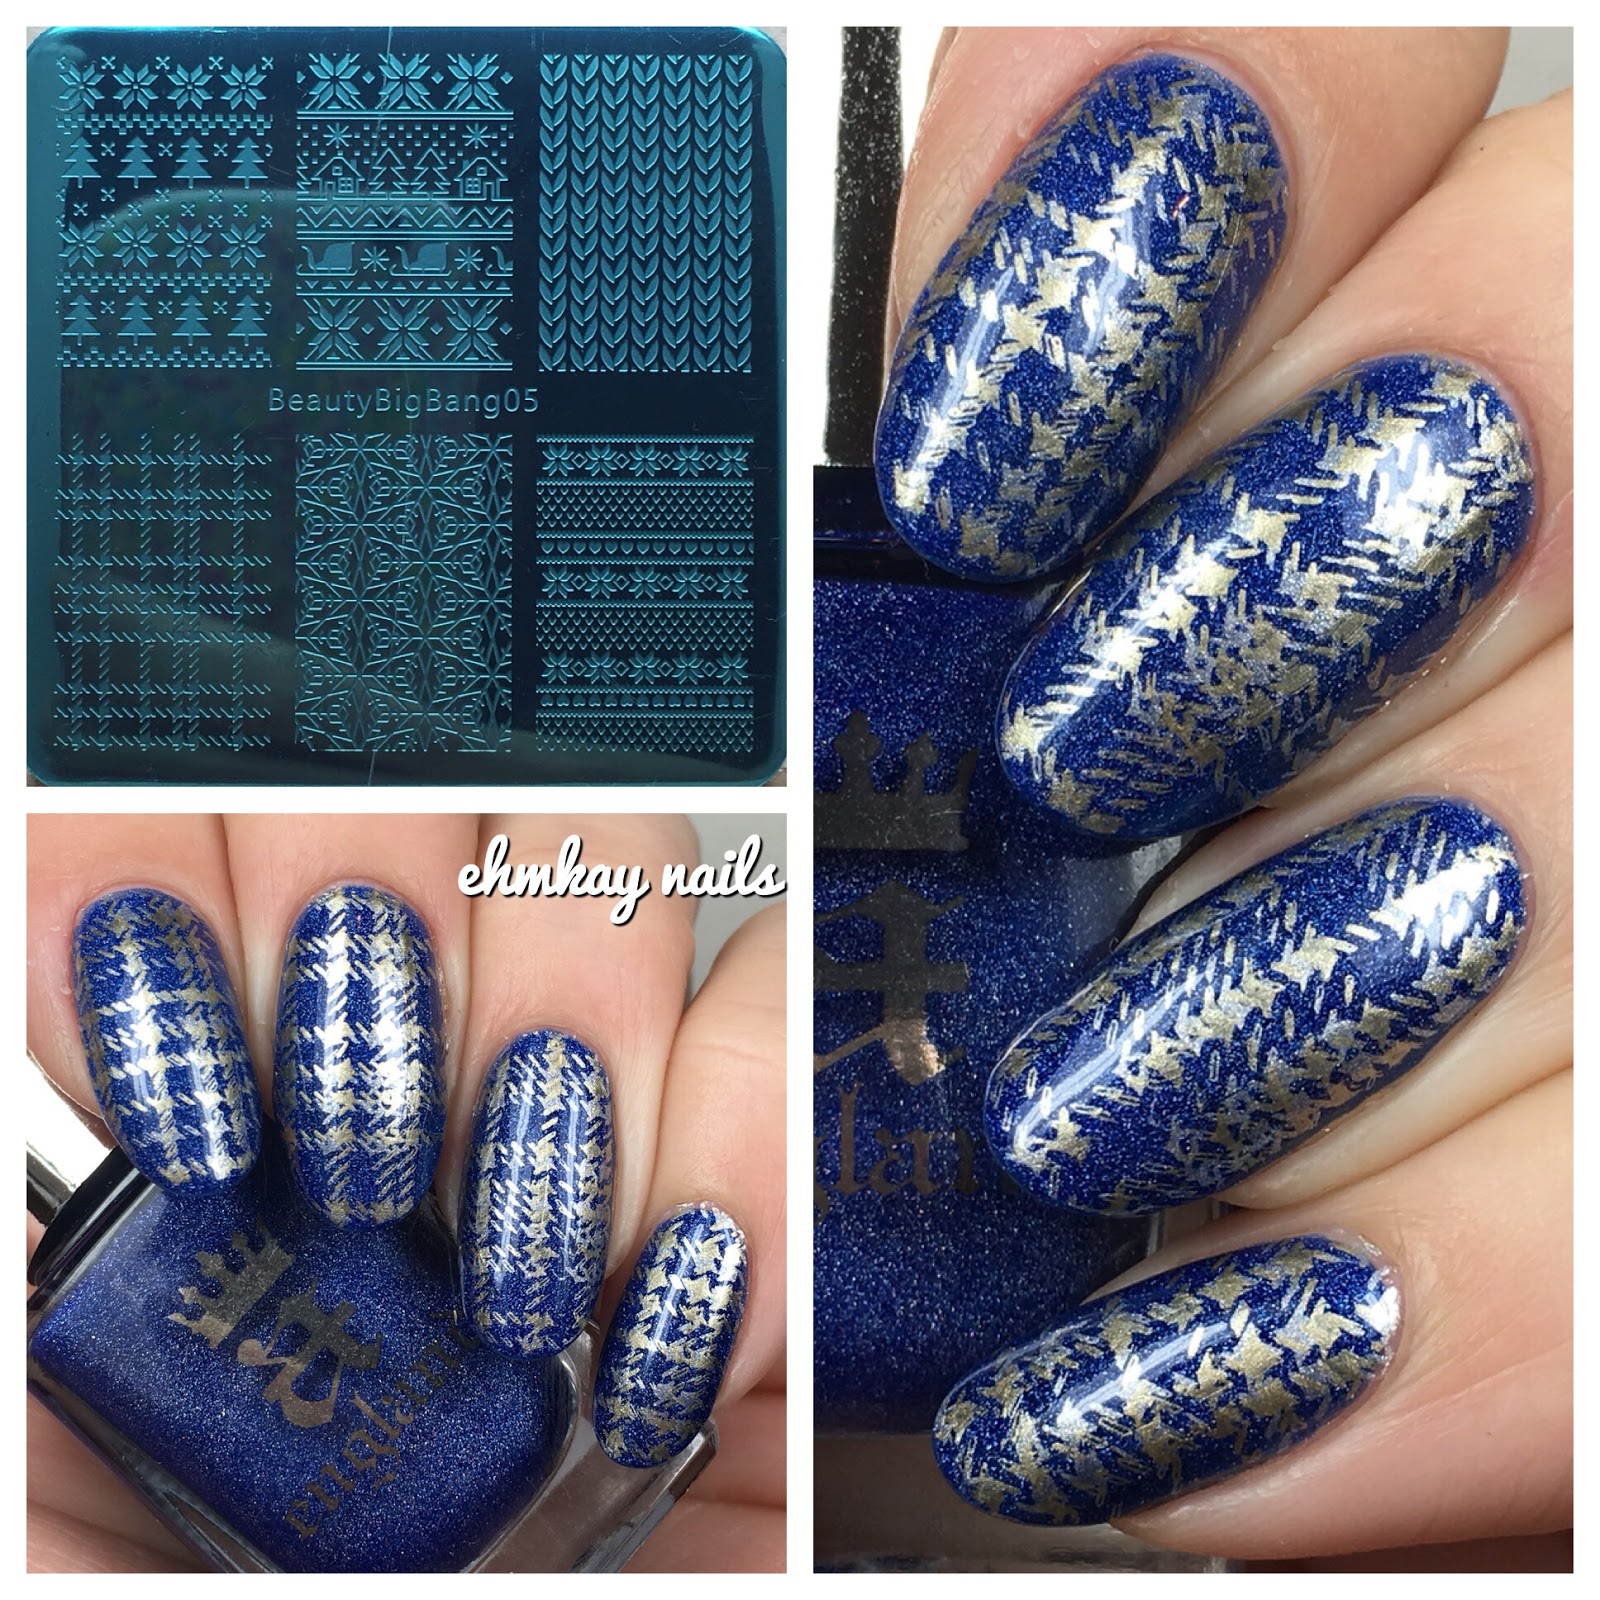 Nail Decorations from BeautyBigbang